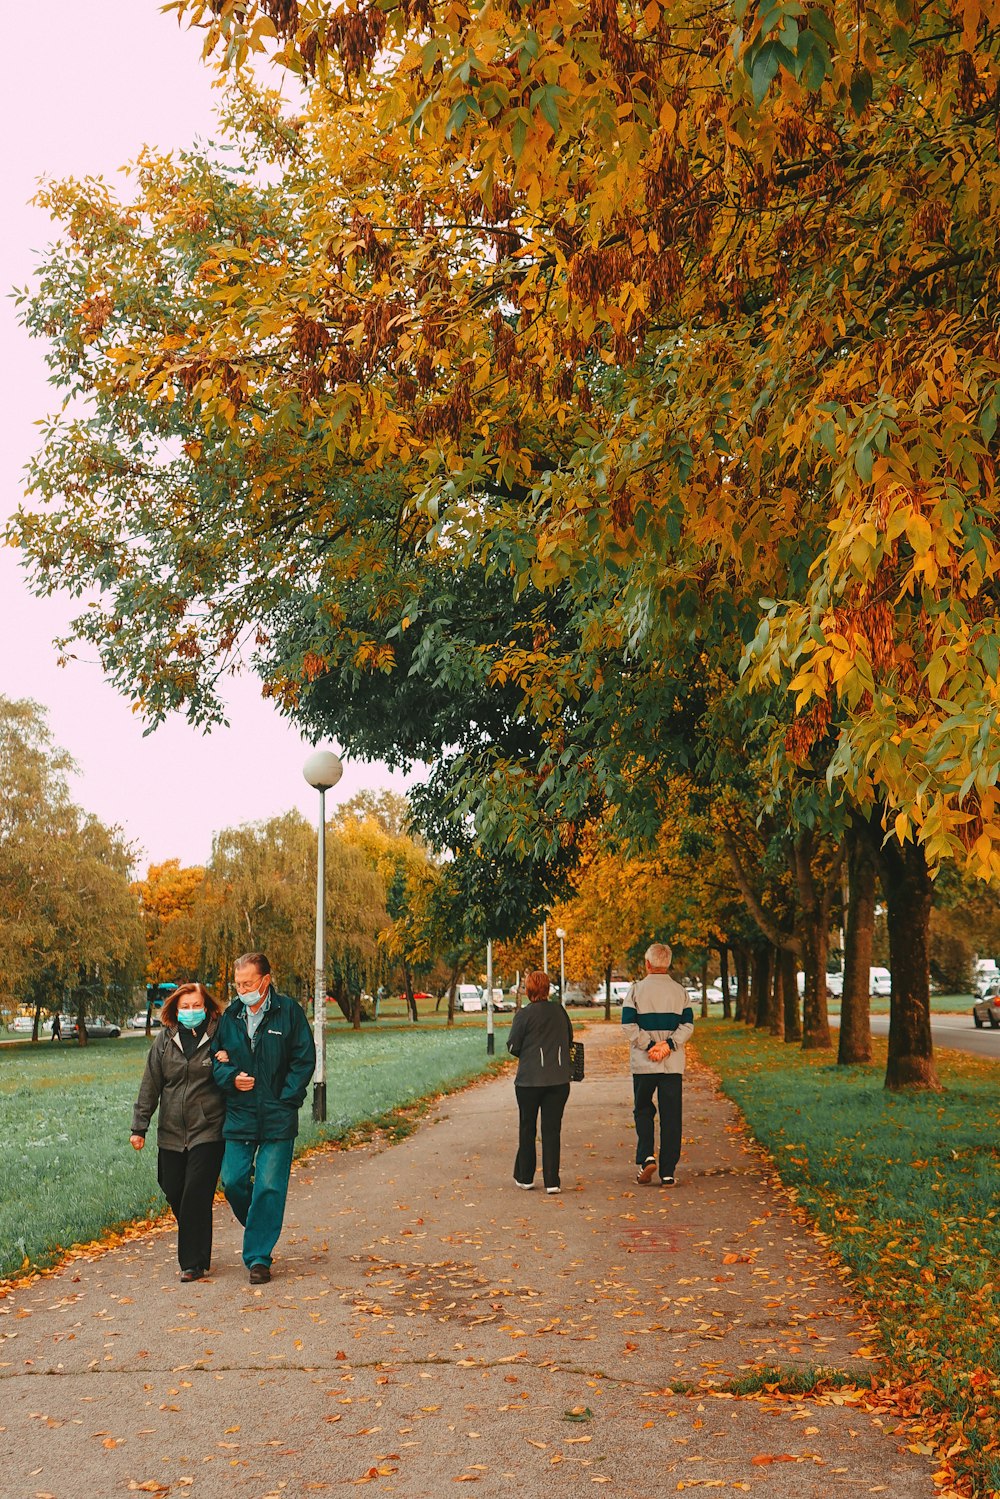 people walking on pathway surrounded by trees during daytime